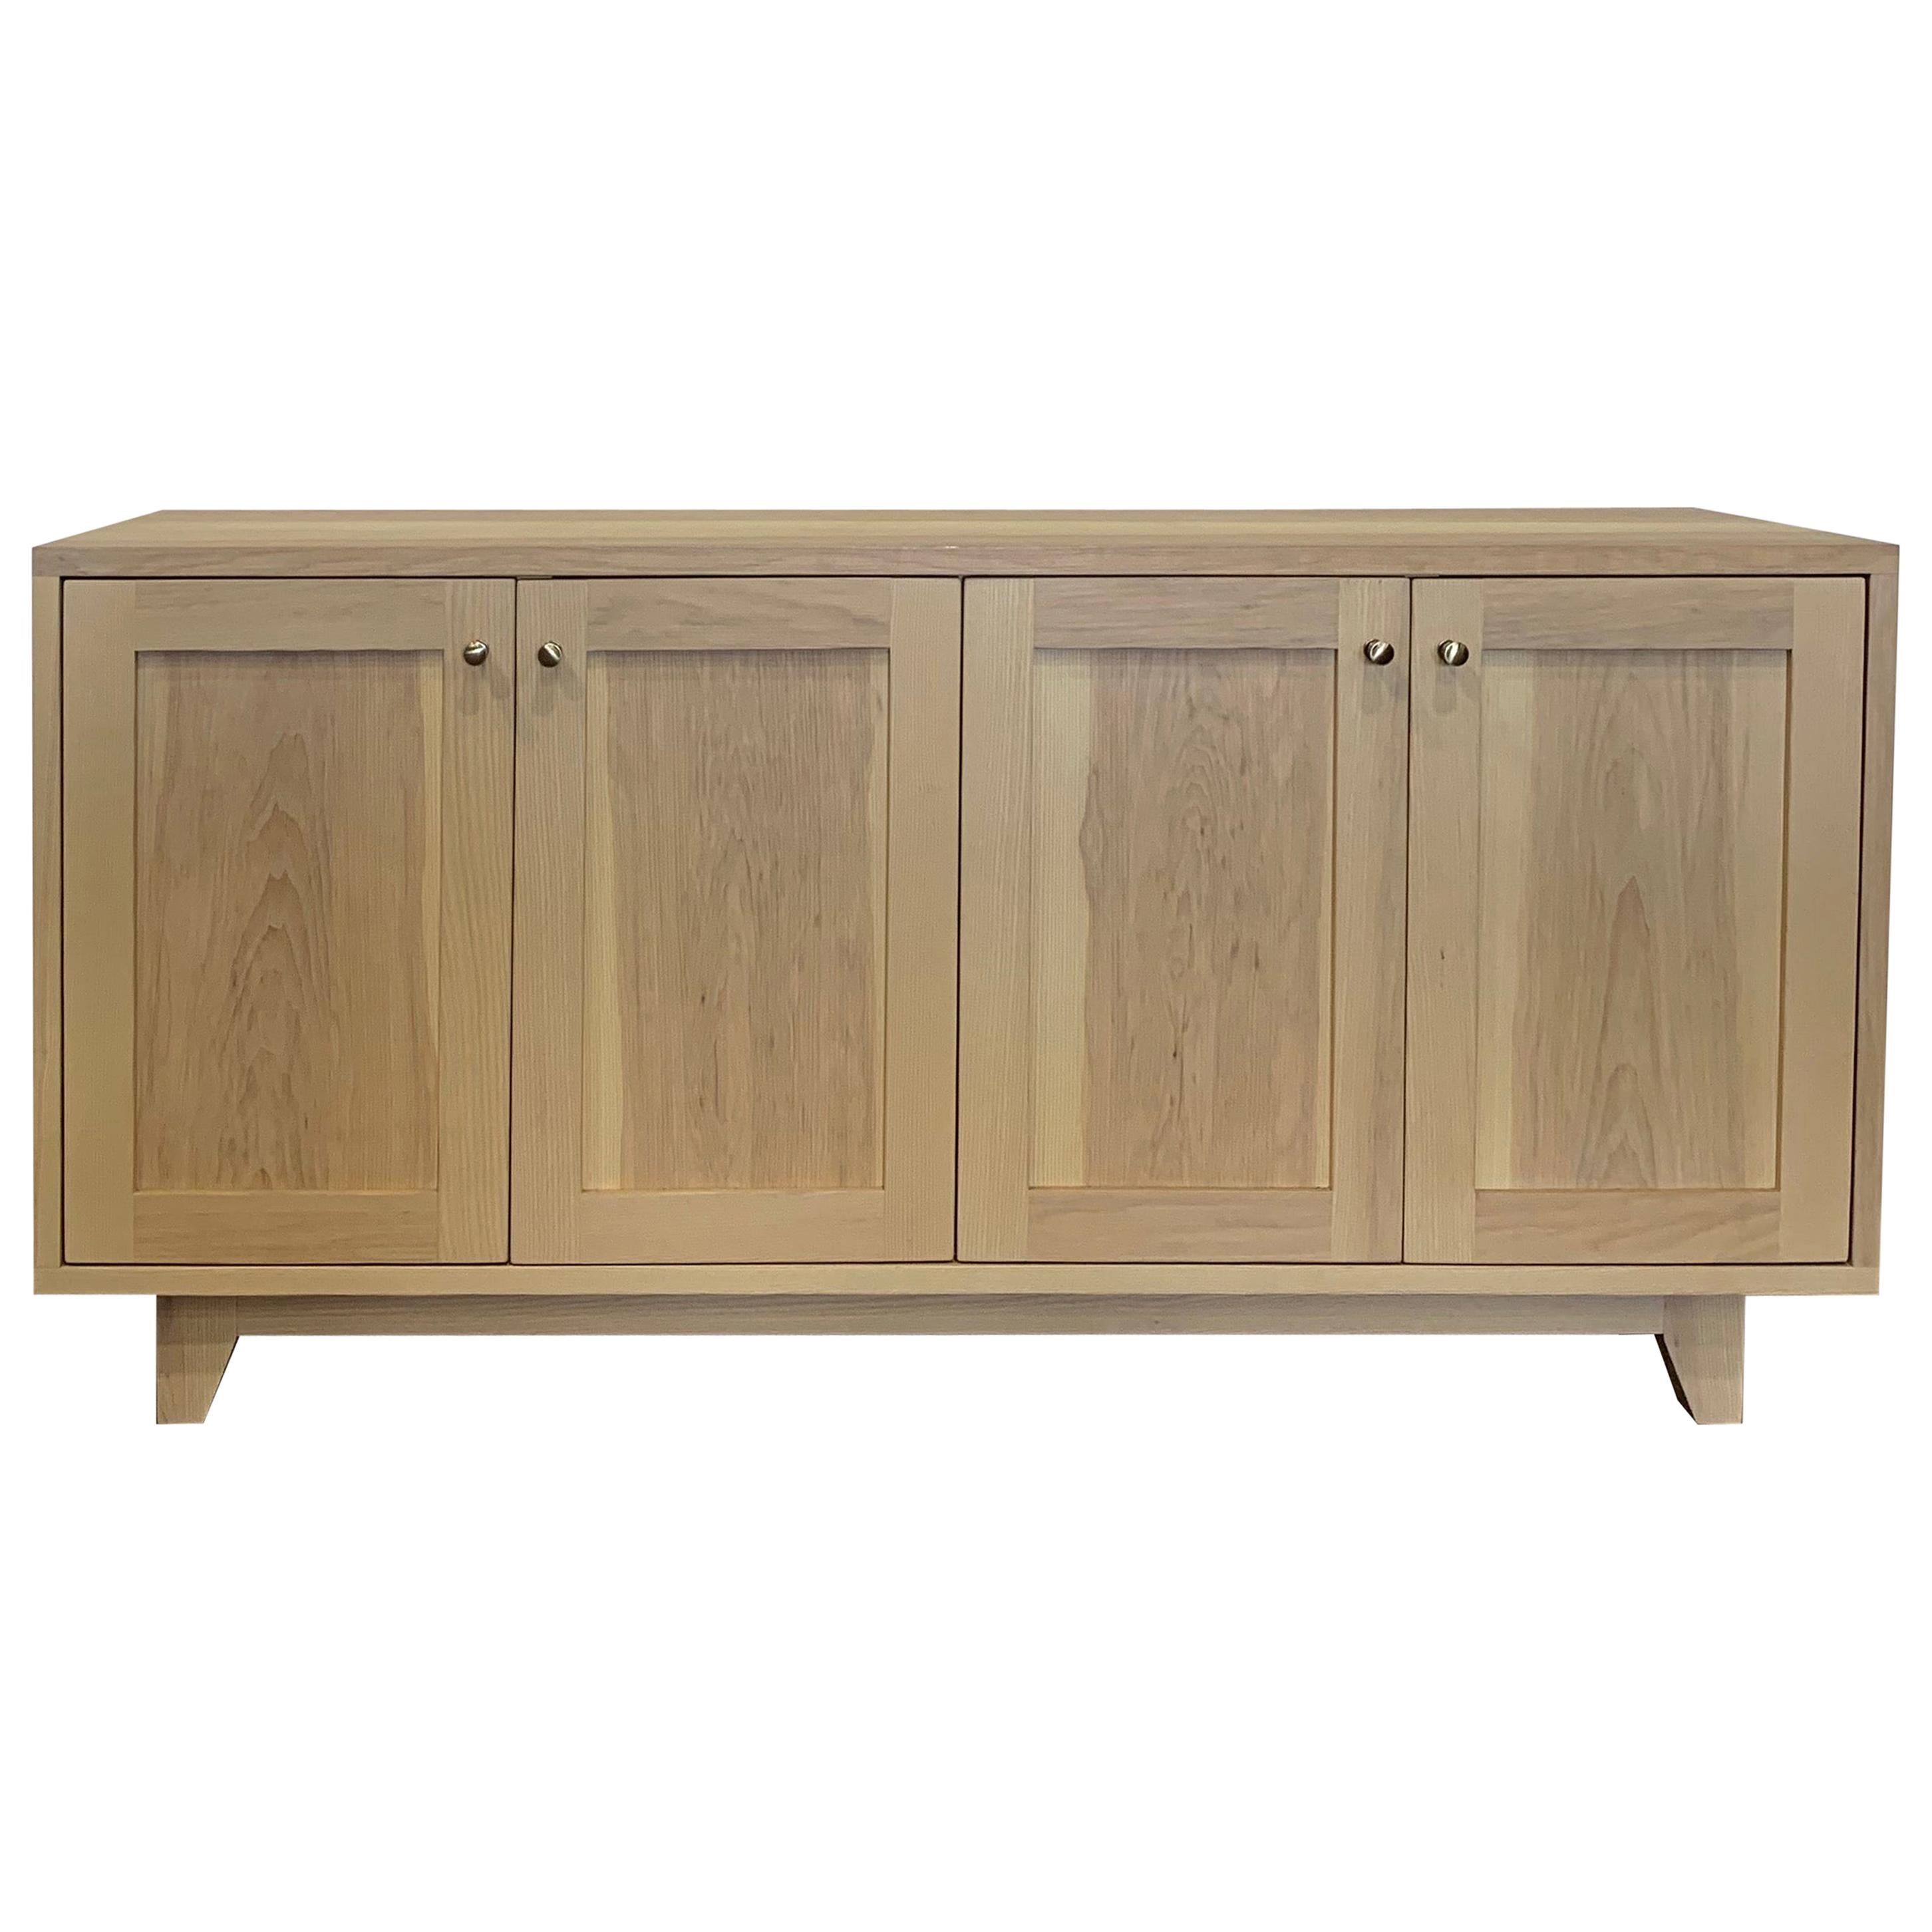 Handcrafted Modern Ash Sideboard with White Washed Finish